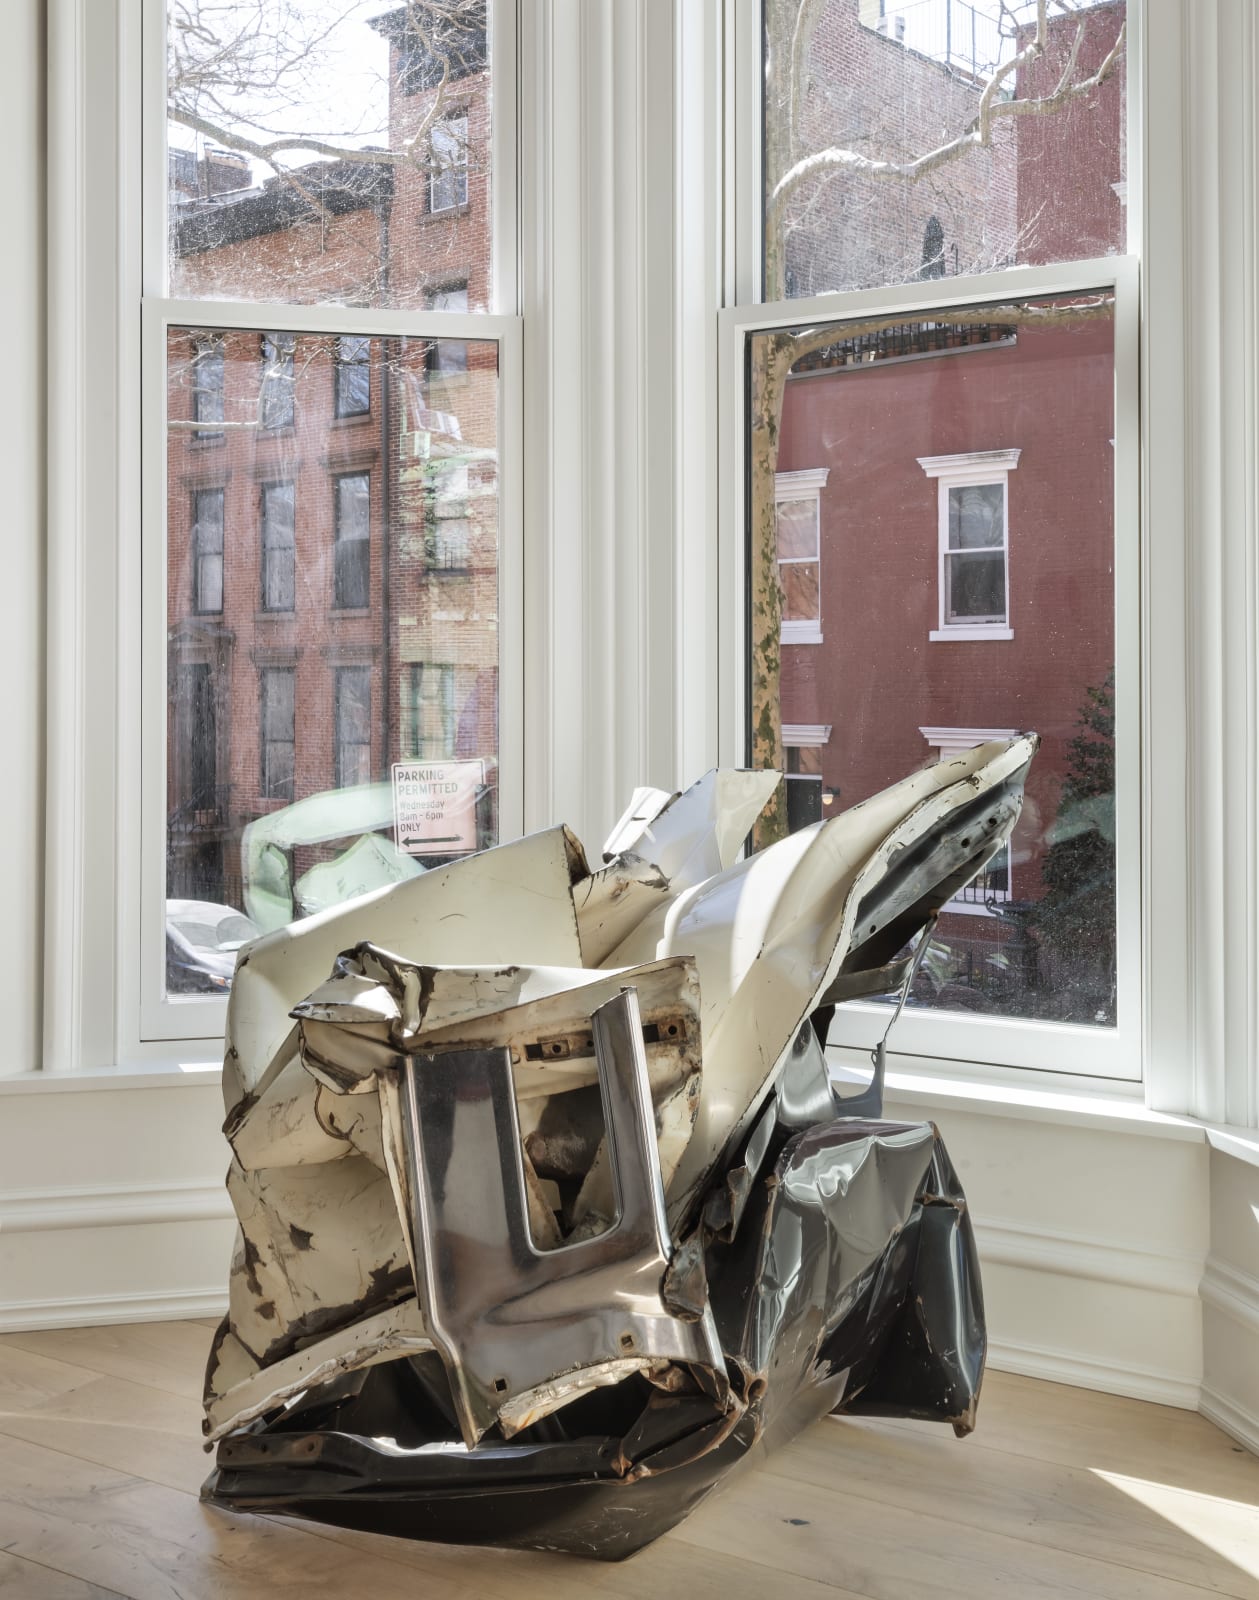 Installation view: John Graham: Comes Home, 1 Sidney Place, Brooklyn, NY